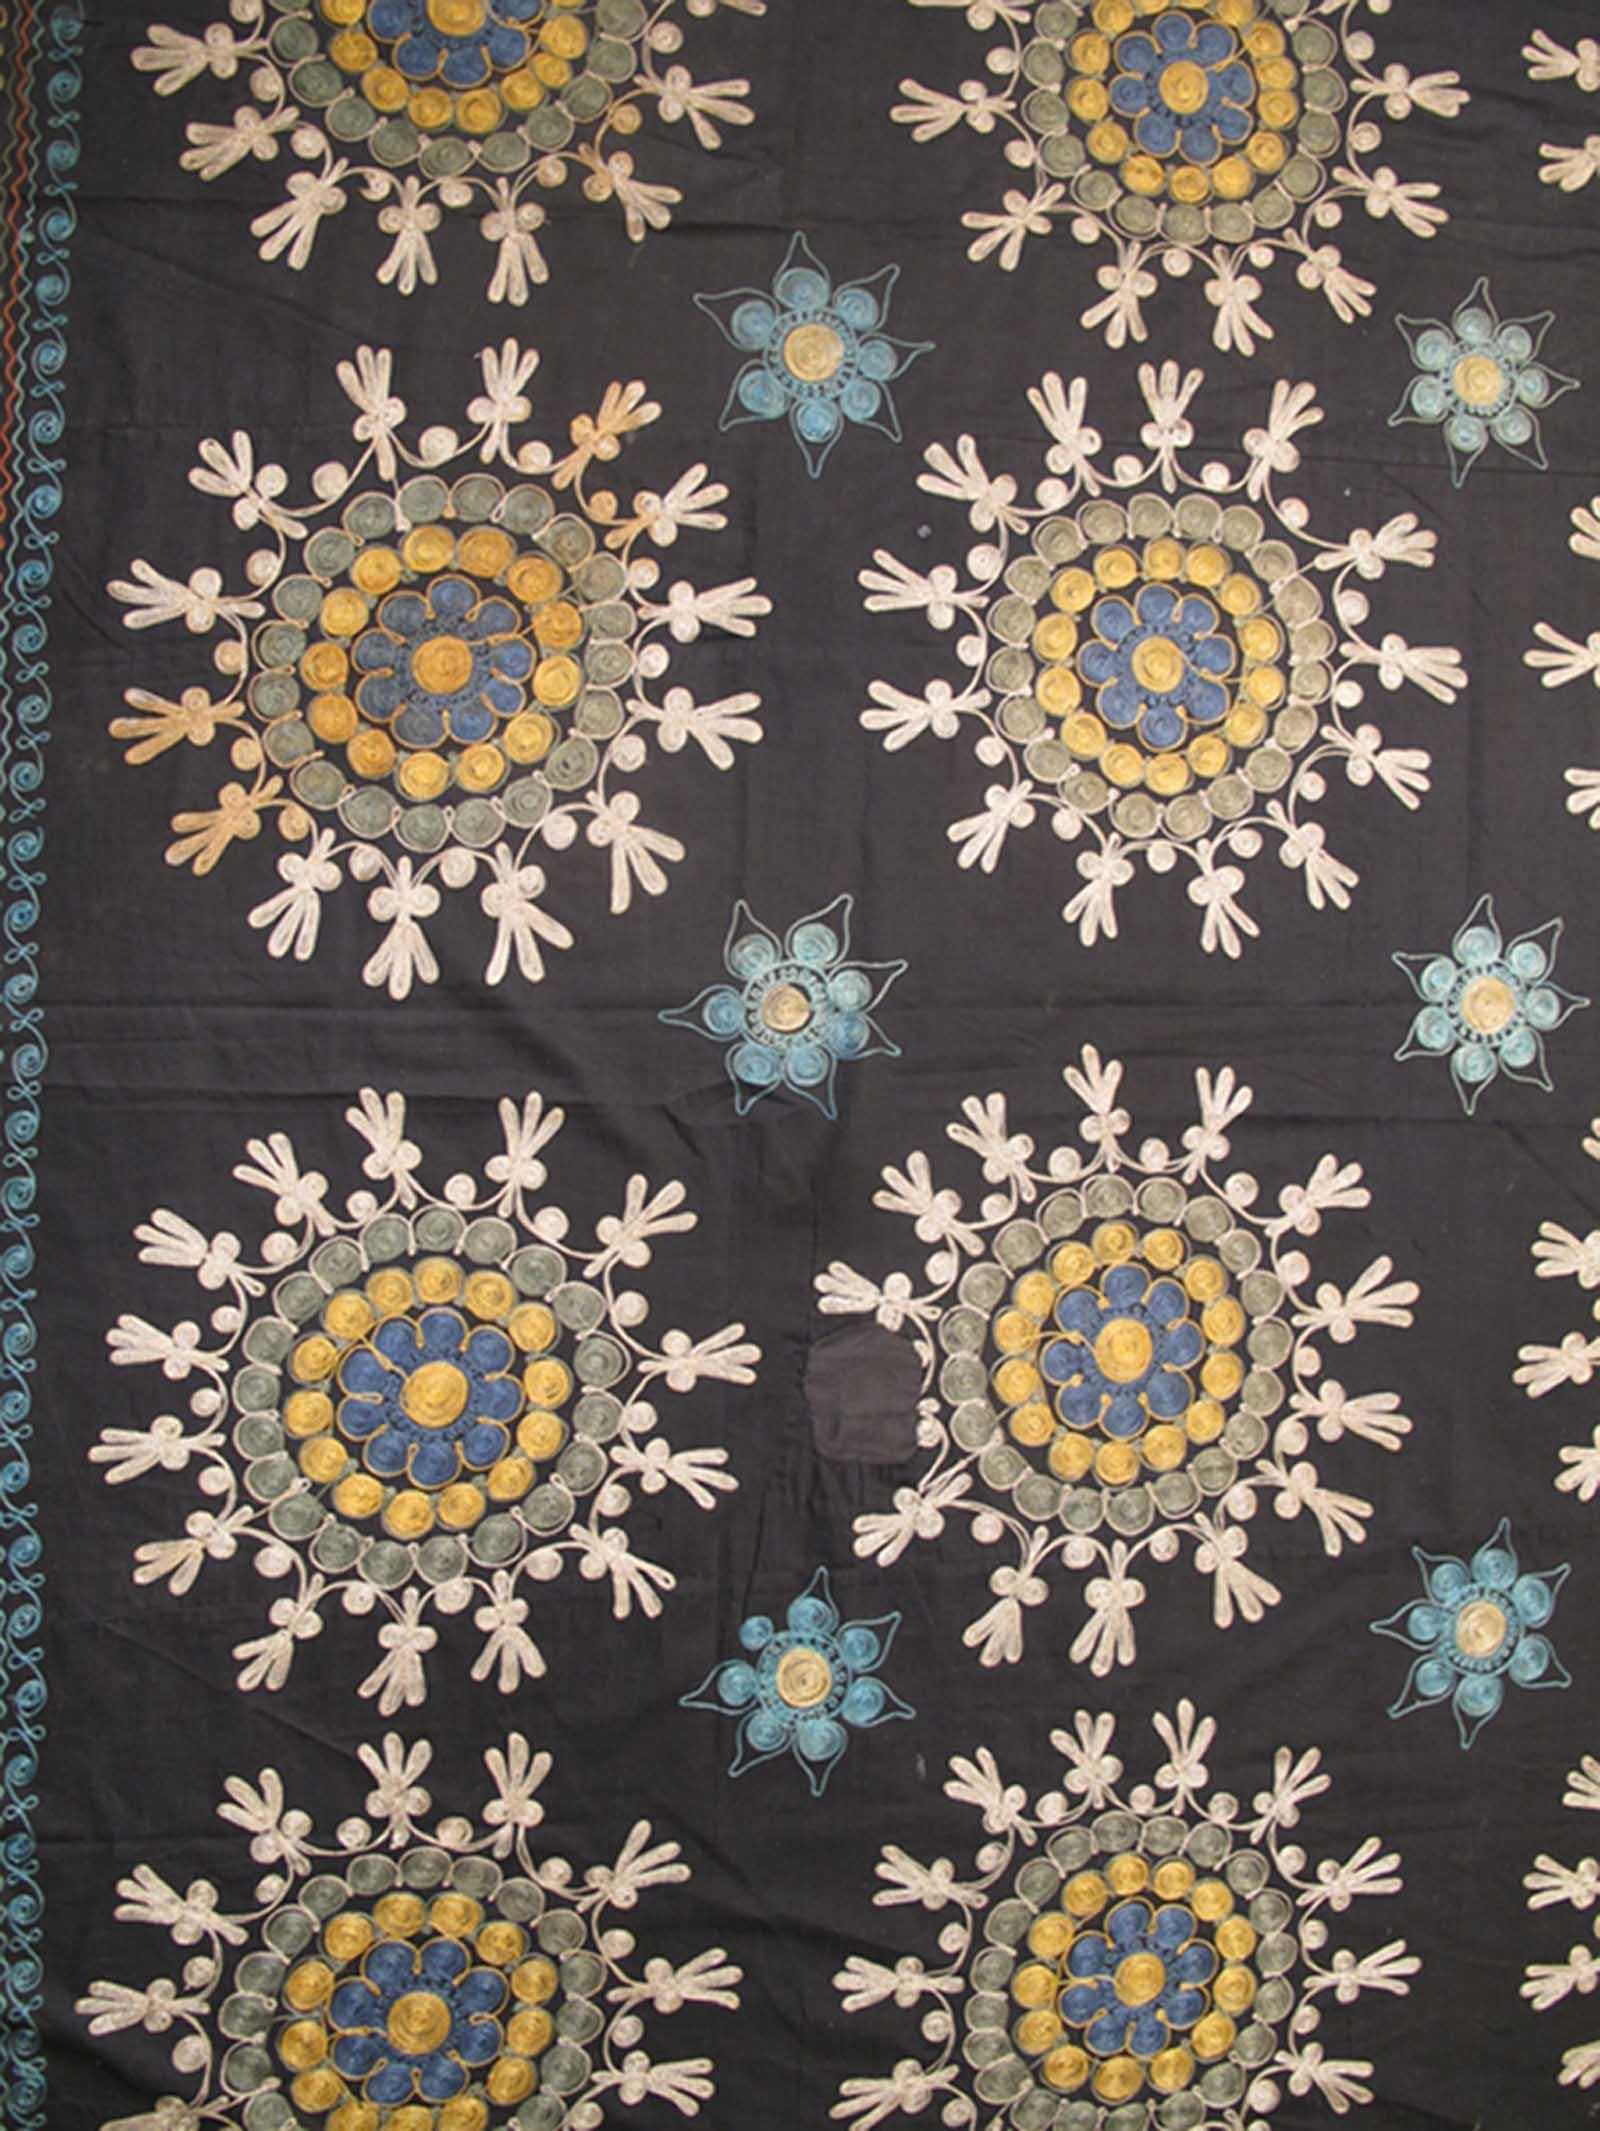 Hand-Woven Vintage Suzani Embroidery in Black Background with Yellow, Blues and Taupe